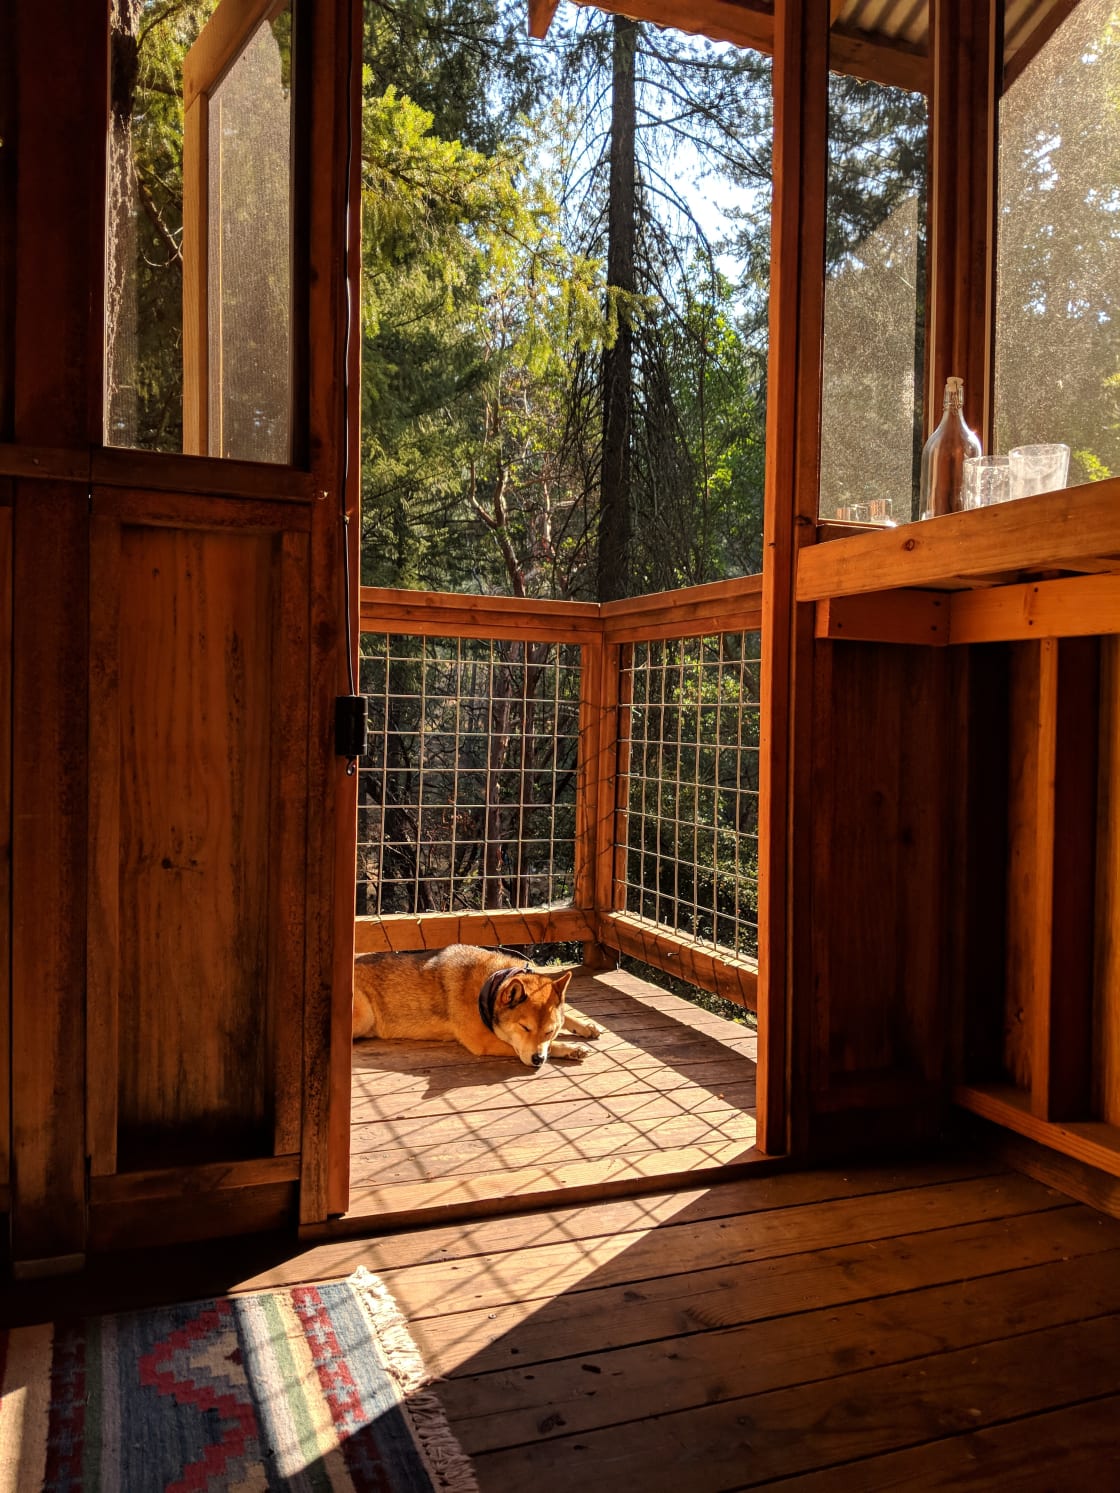 Our pup enjoyed the little outlook